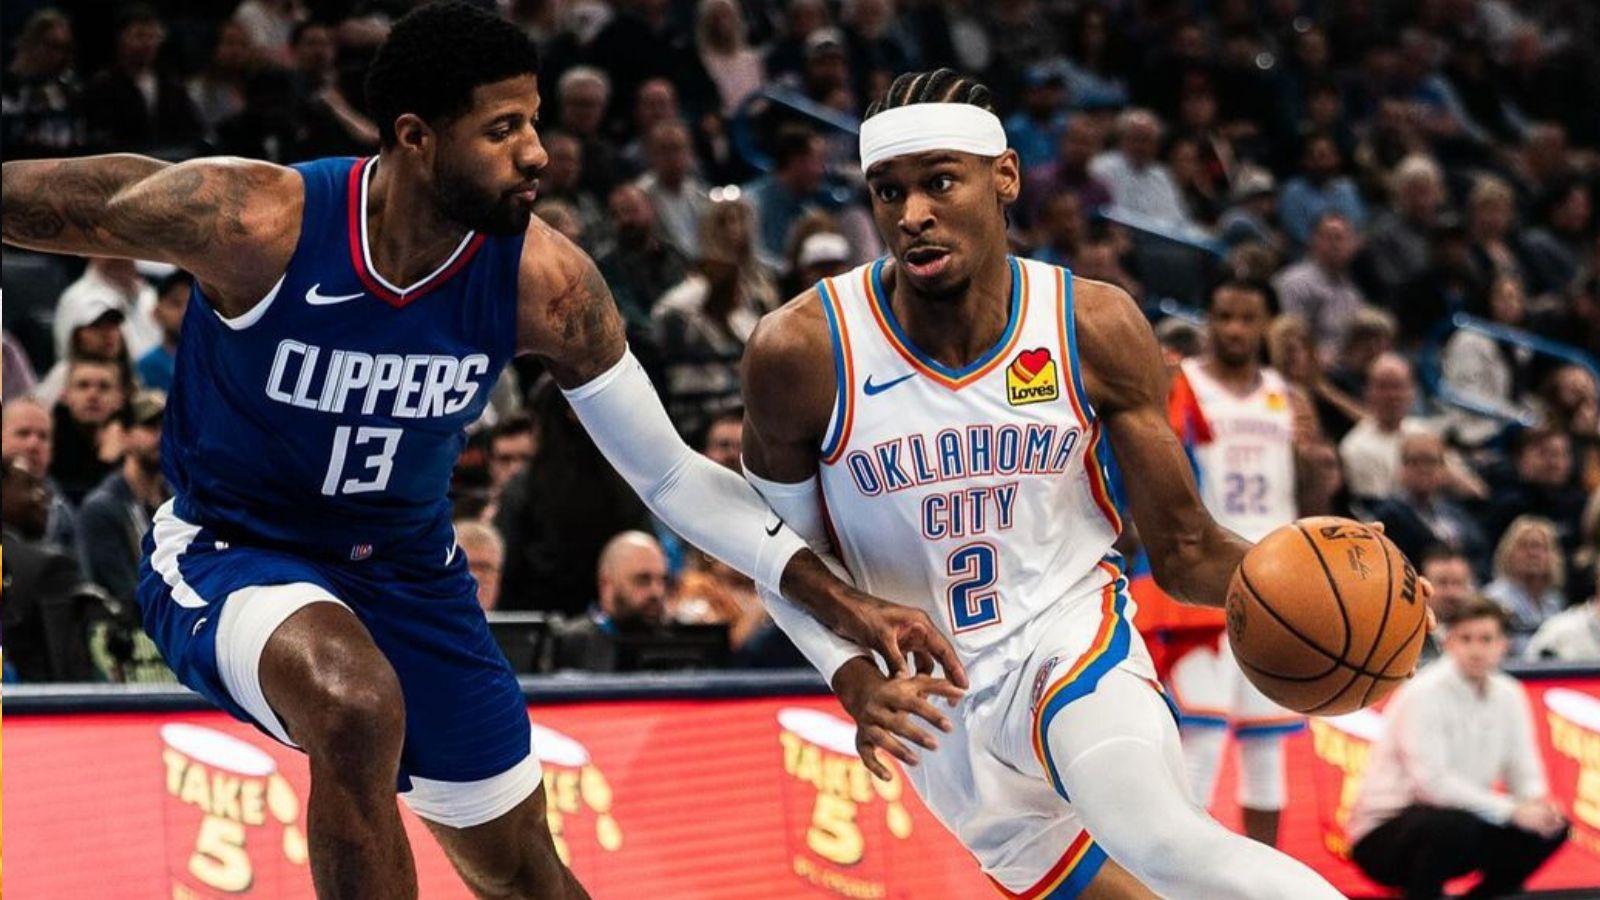 Shai Gilgeous-Alexander driving to the basket as a member of the Oklahoma City Thunder.